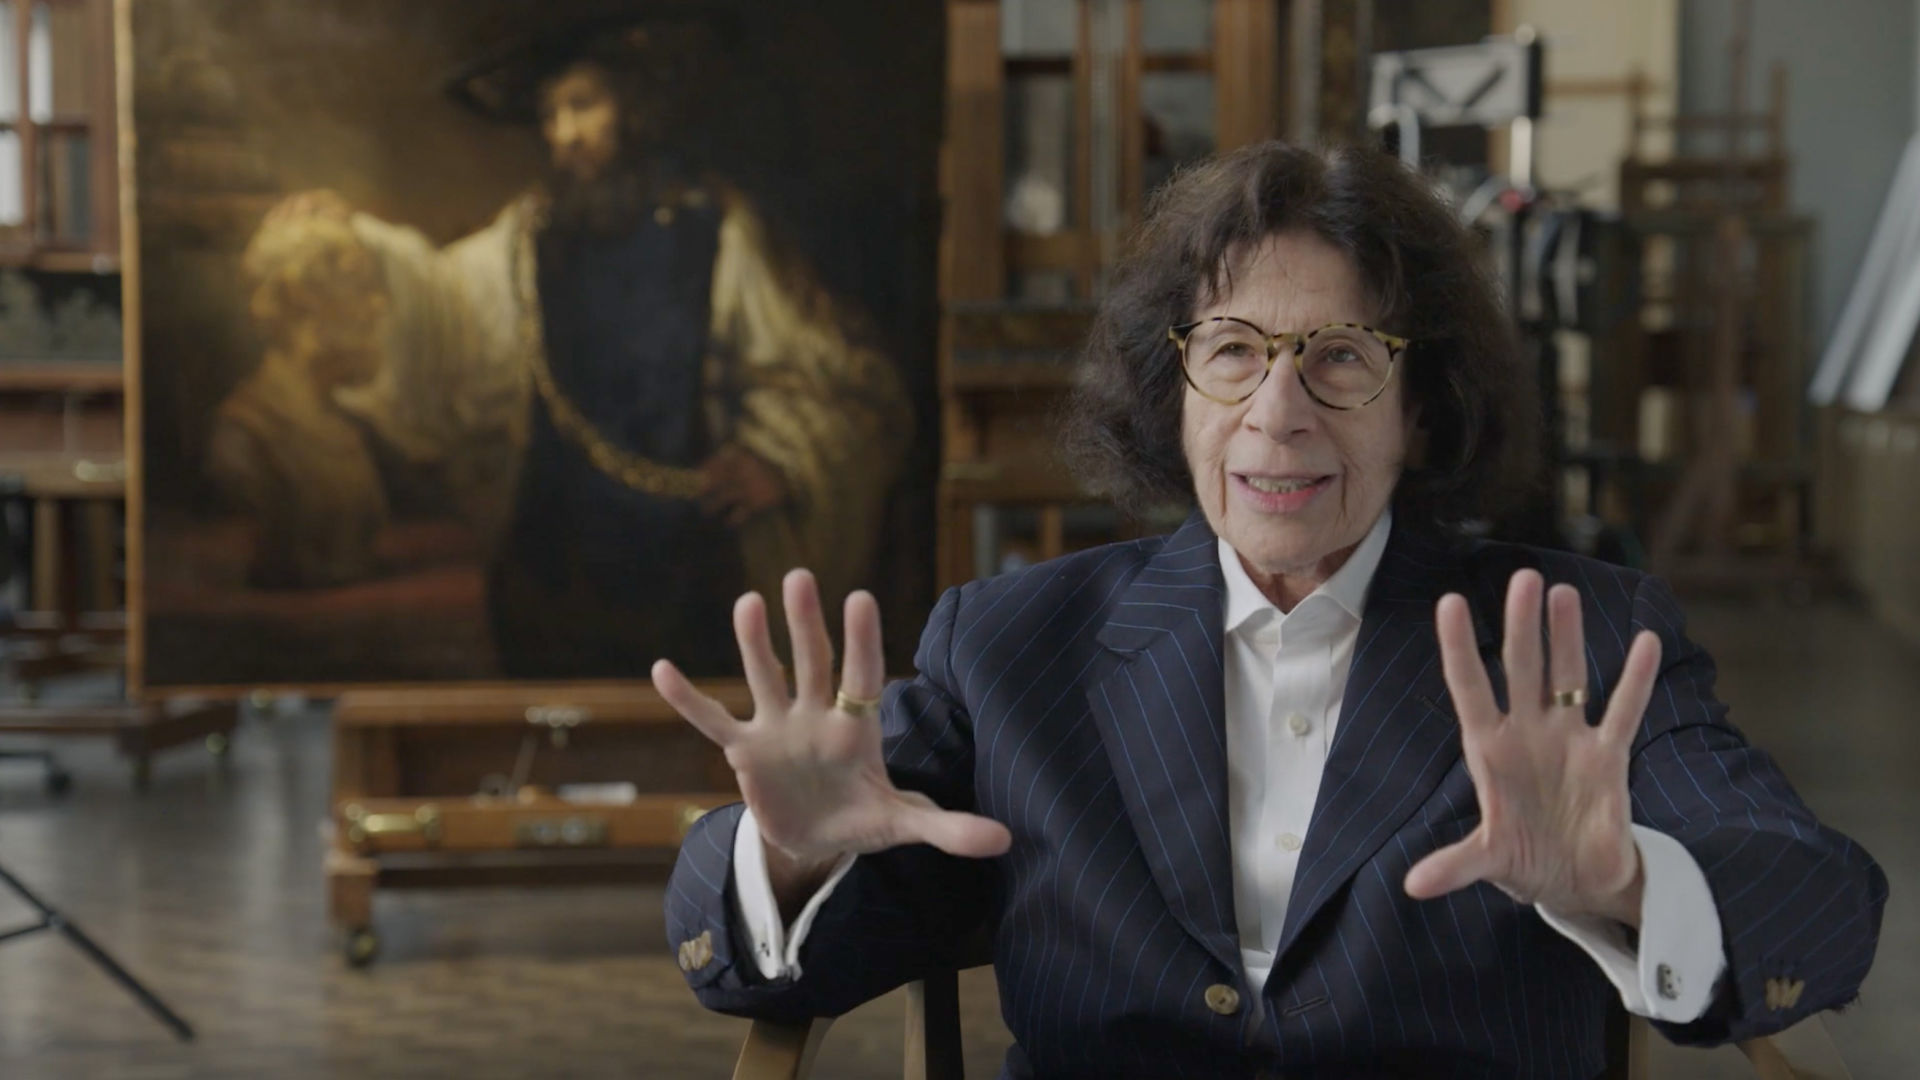 Writer Fran Lebowitz speaking and gesturing with her hands in The Met’s Paintings Conservation Lab in front of Rembrandt’s Aristotle with a Bust of Homer painting.